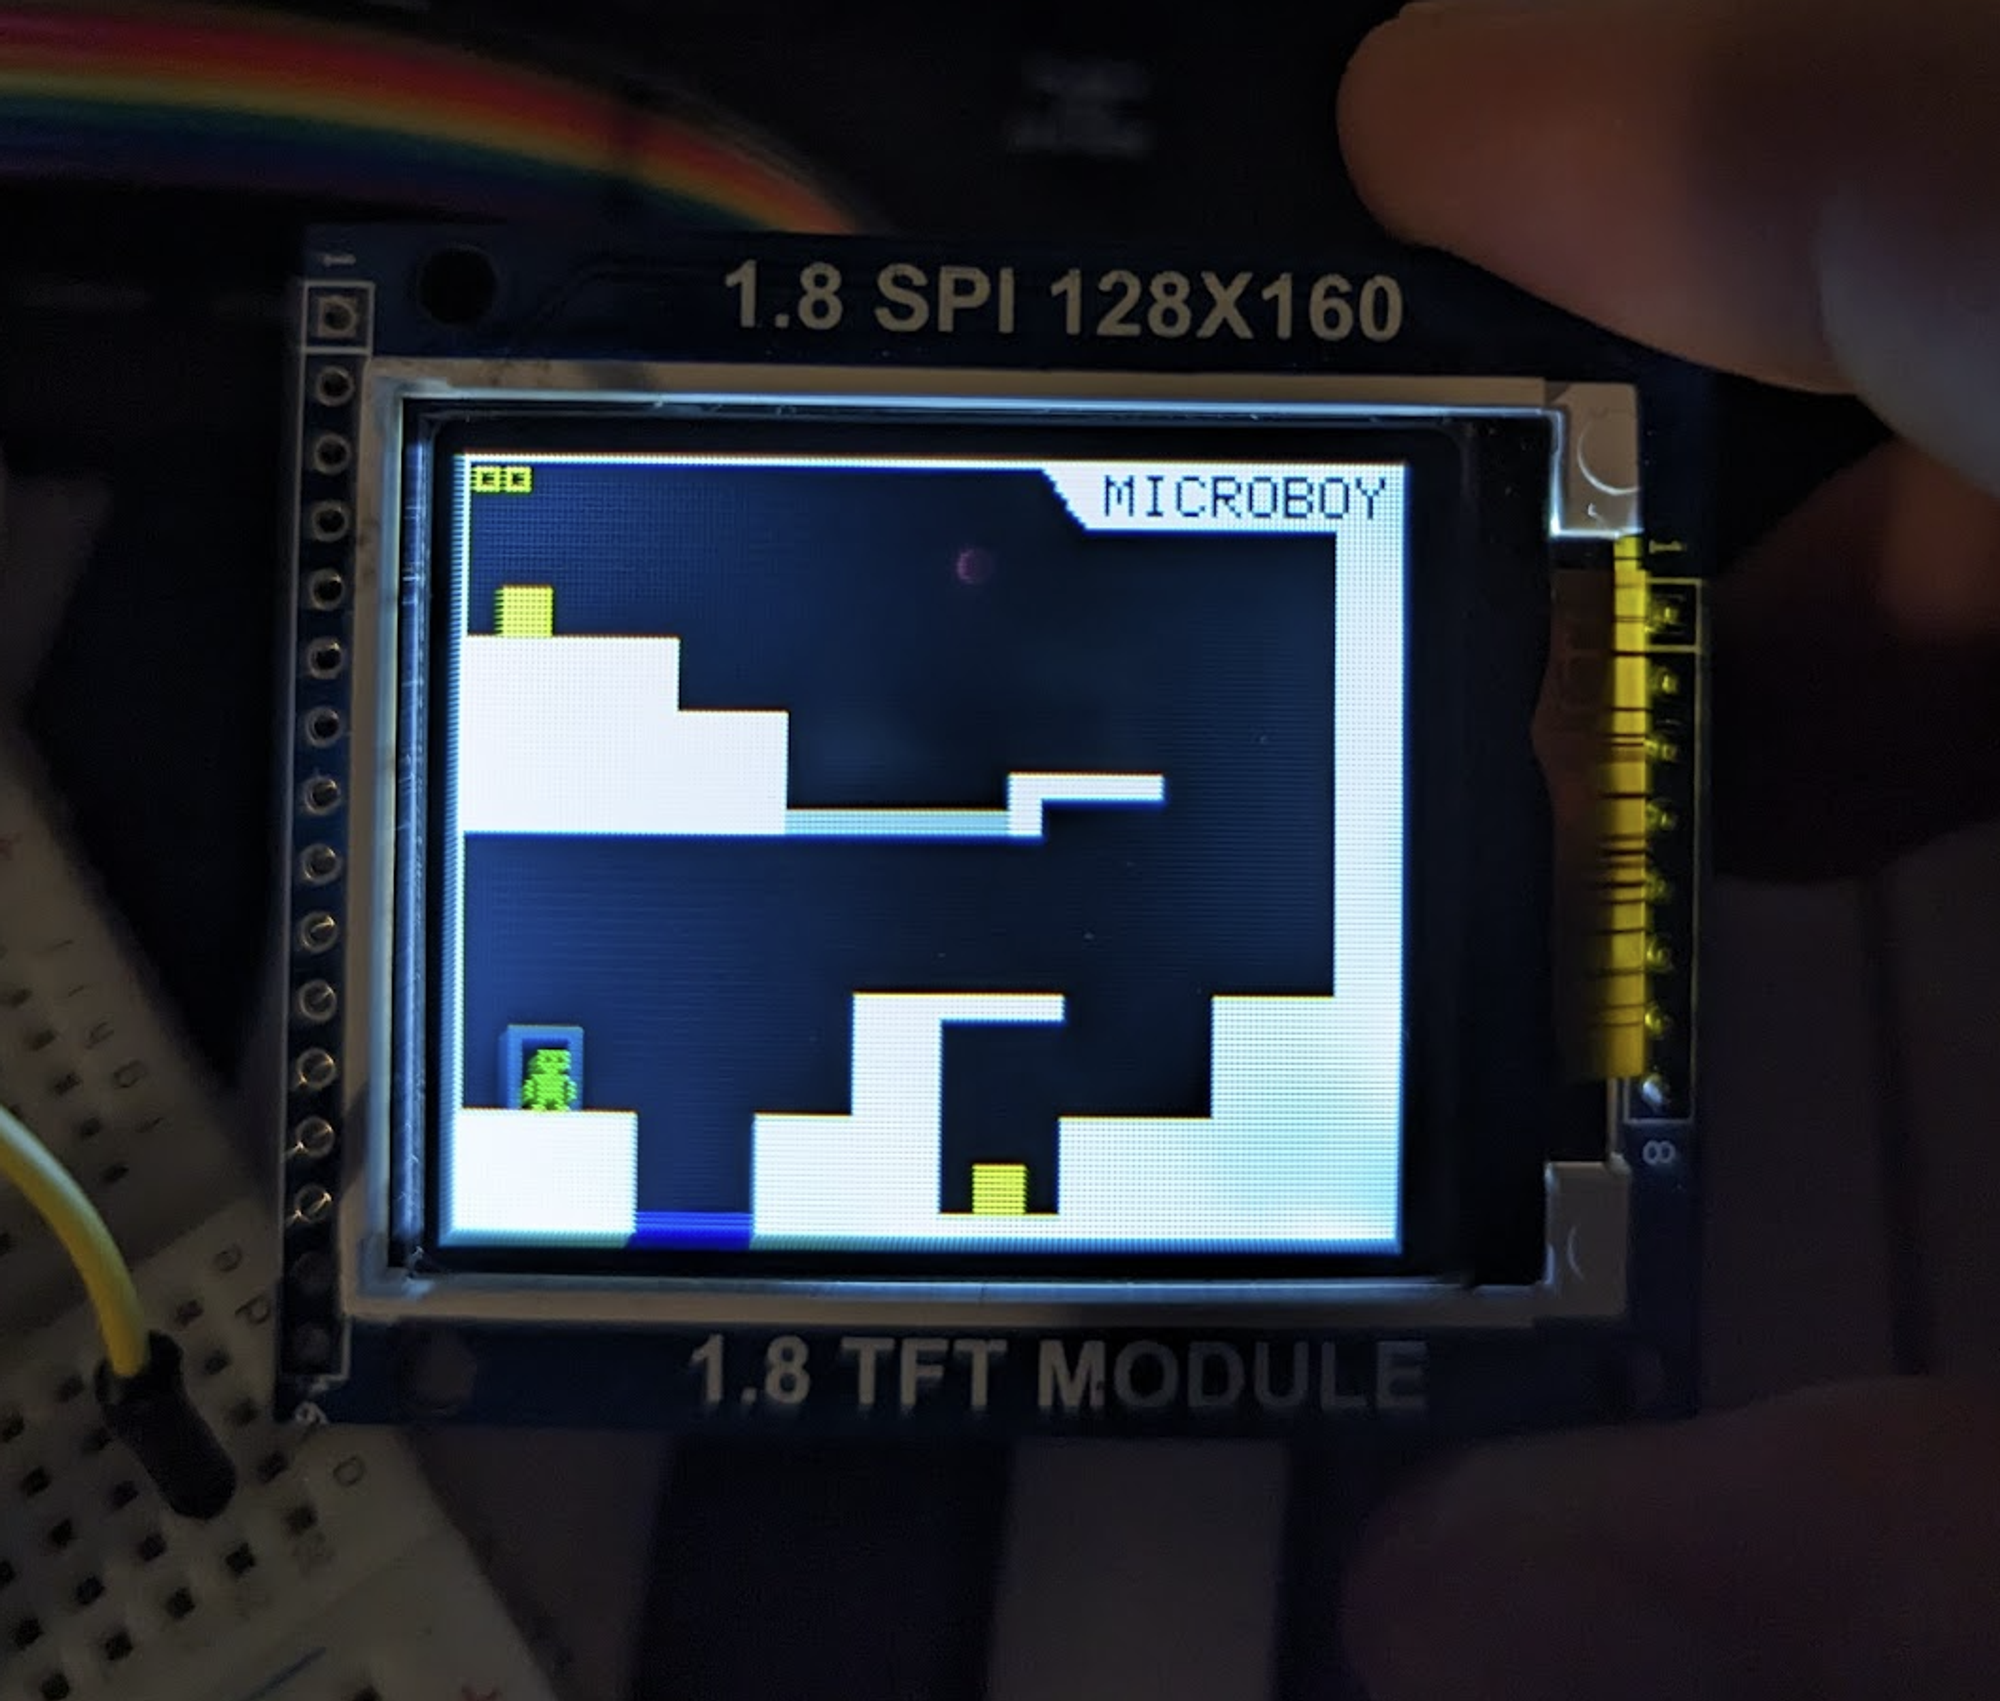 Wrote a little jump and run game with the Adafruit GFX library, using an Arduino Micro